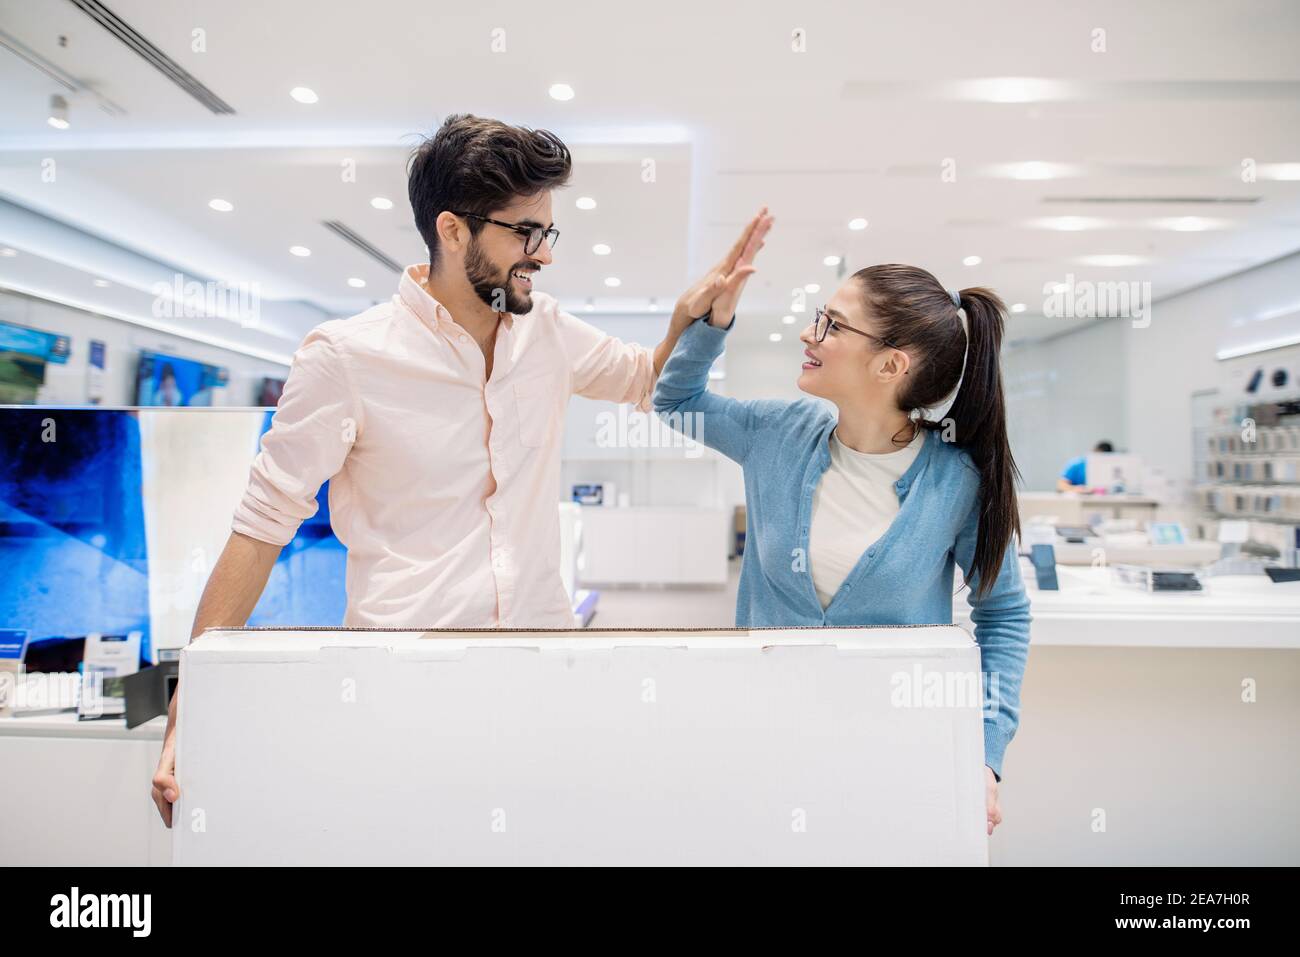 Happy couple buying plasma TV and giving high-five. Tech store interior. Stock Photo